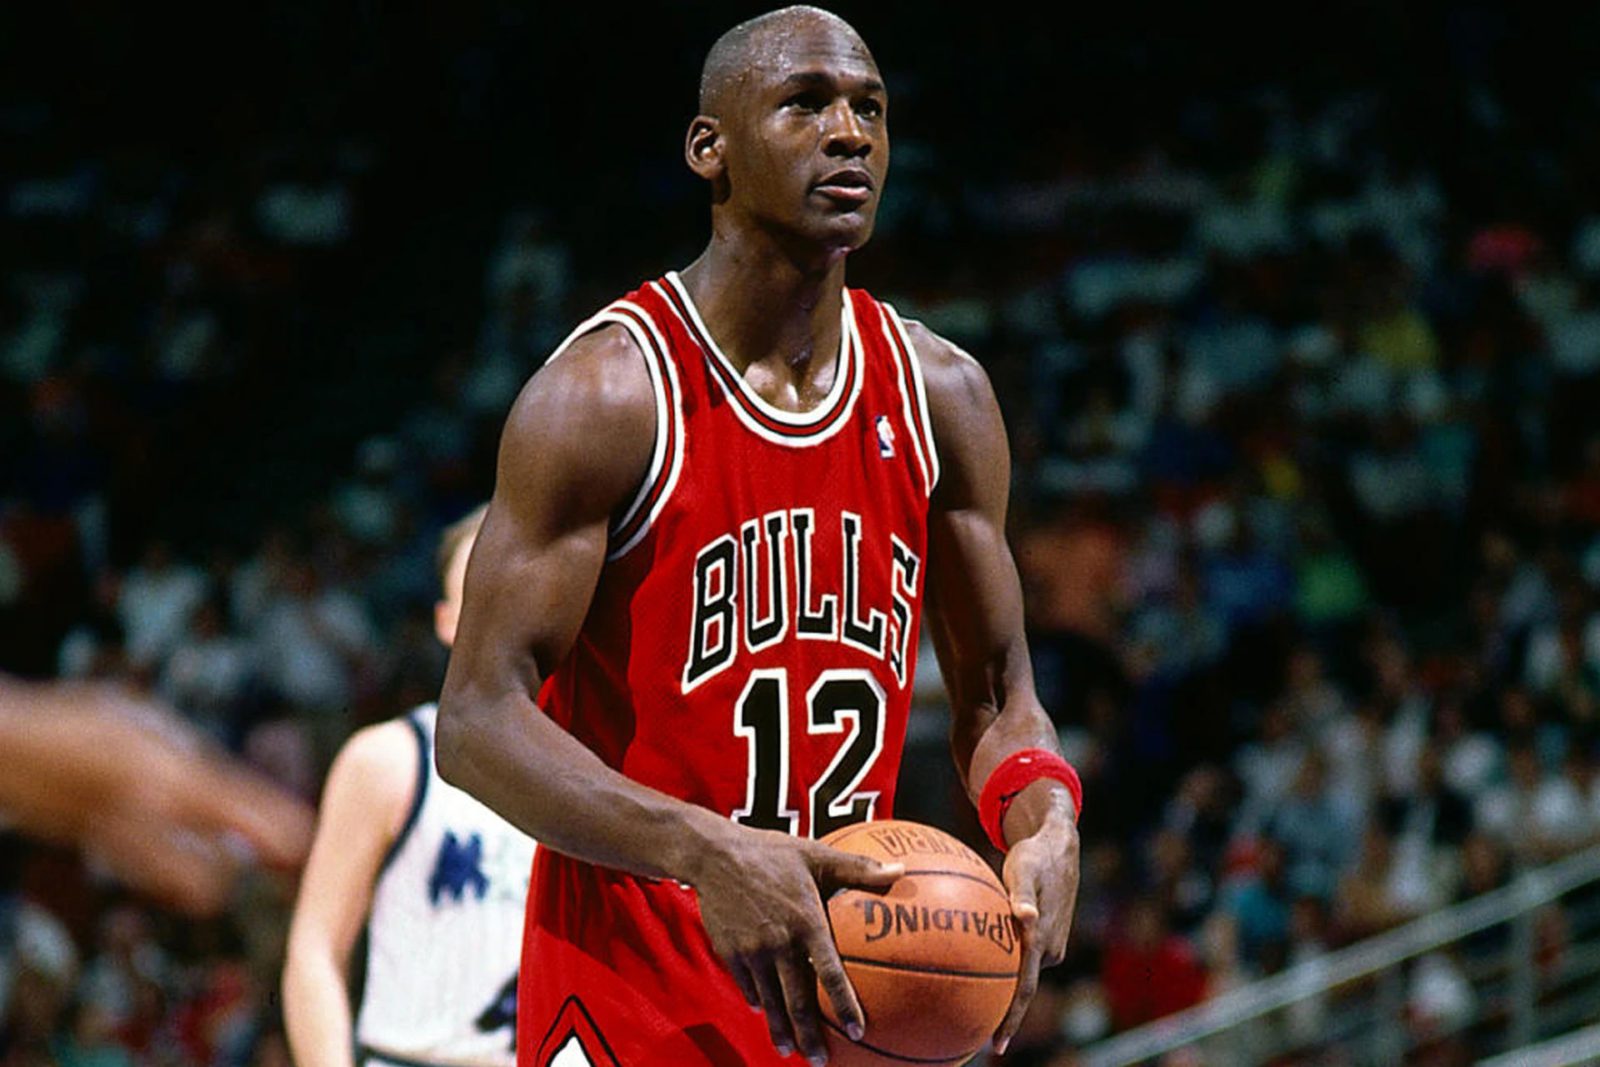 Michael Jordan was offered $100m For An Event. He Said No